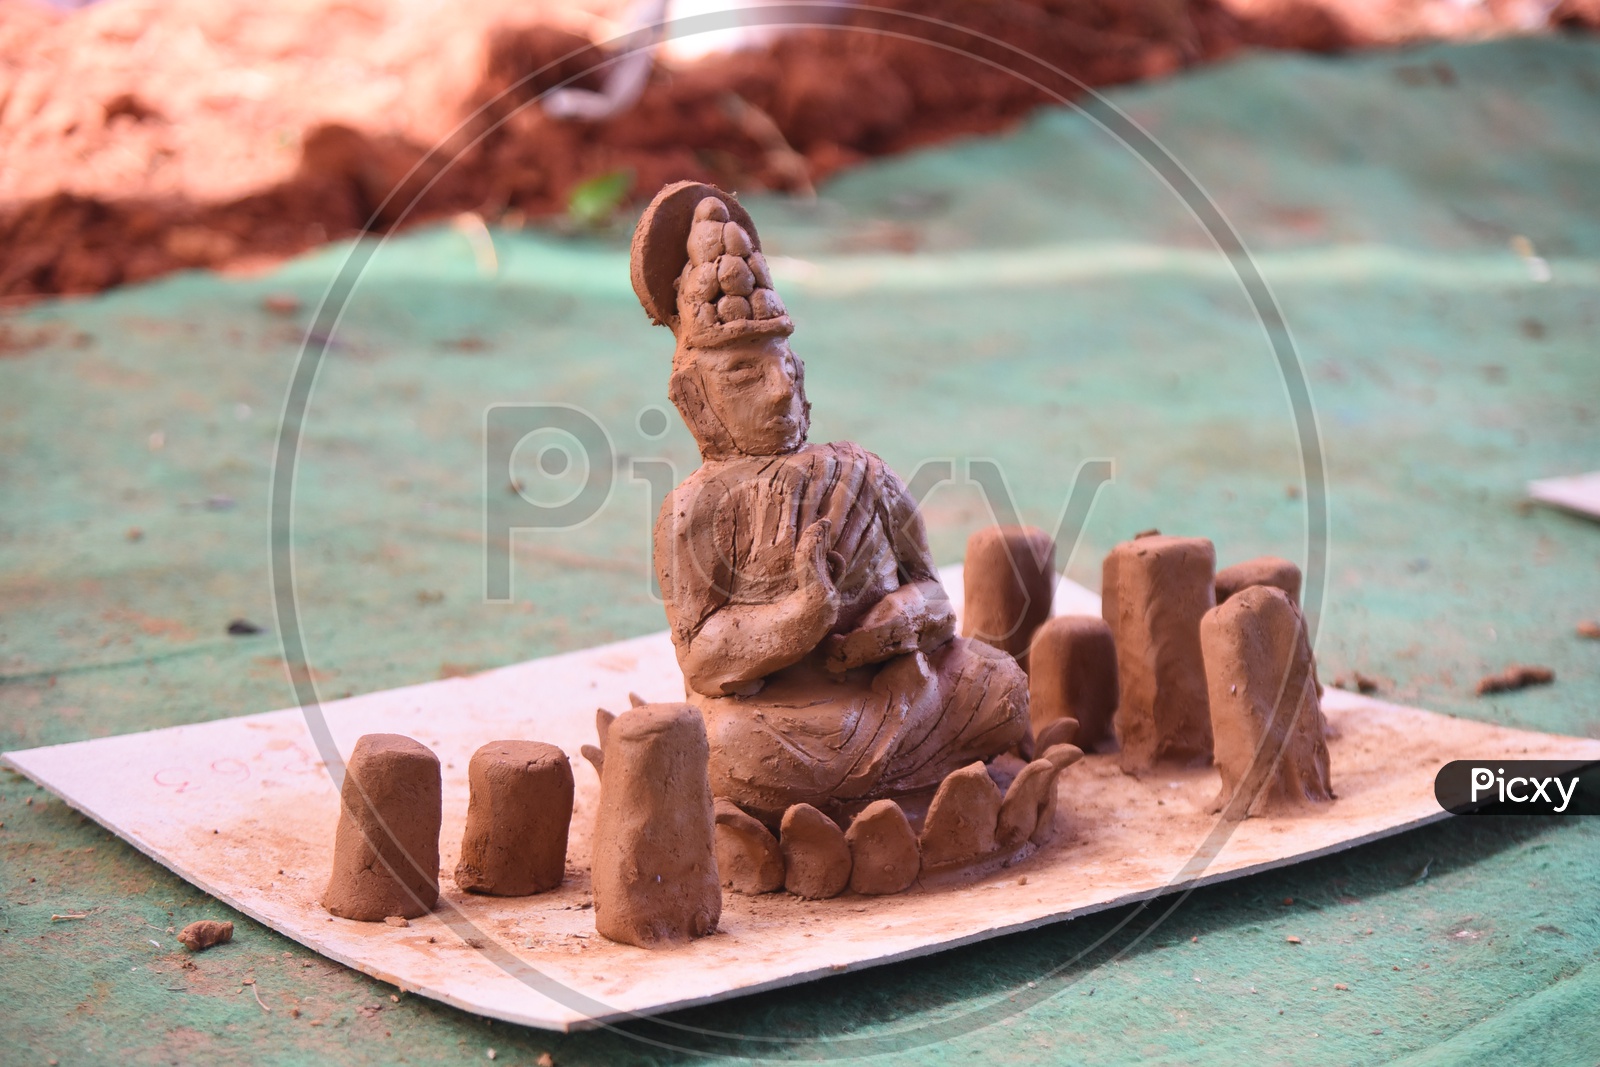 Clay Art By Students